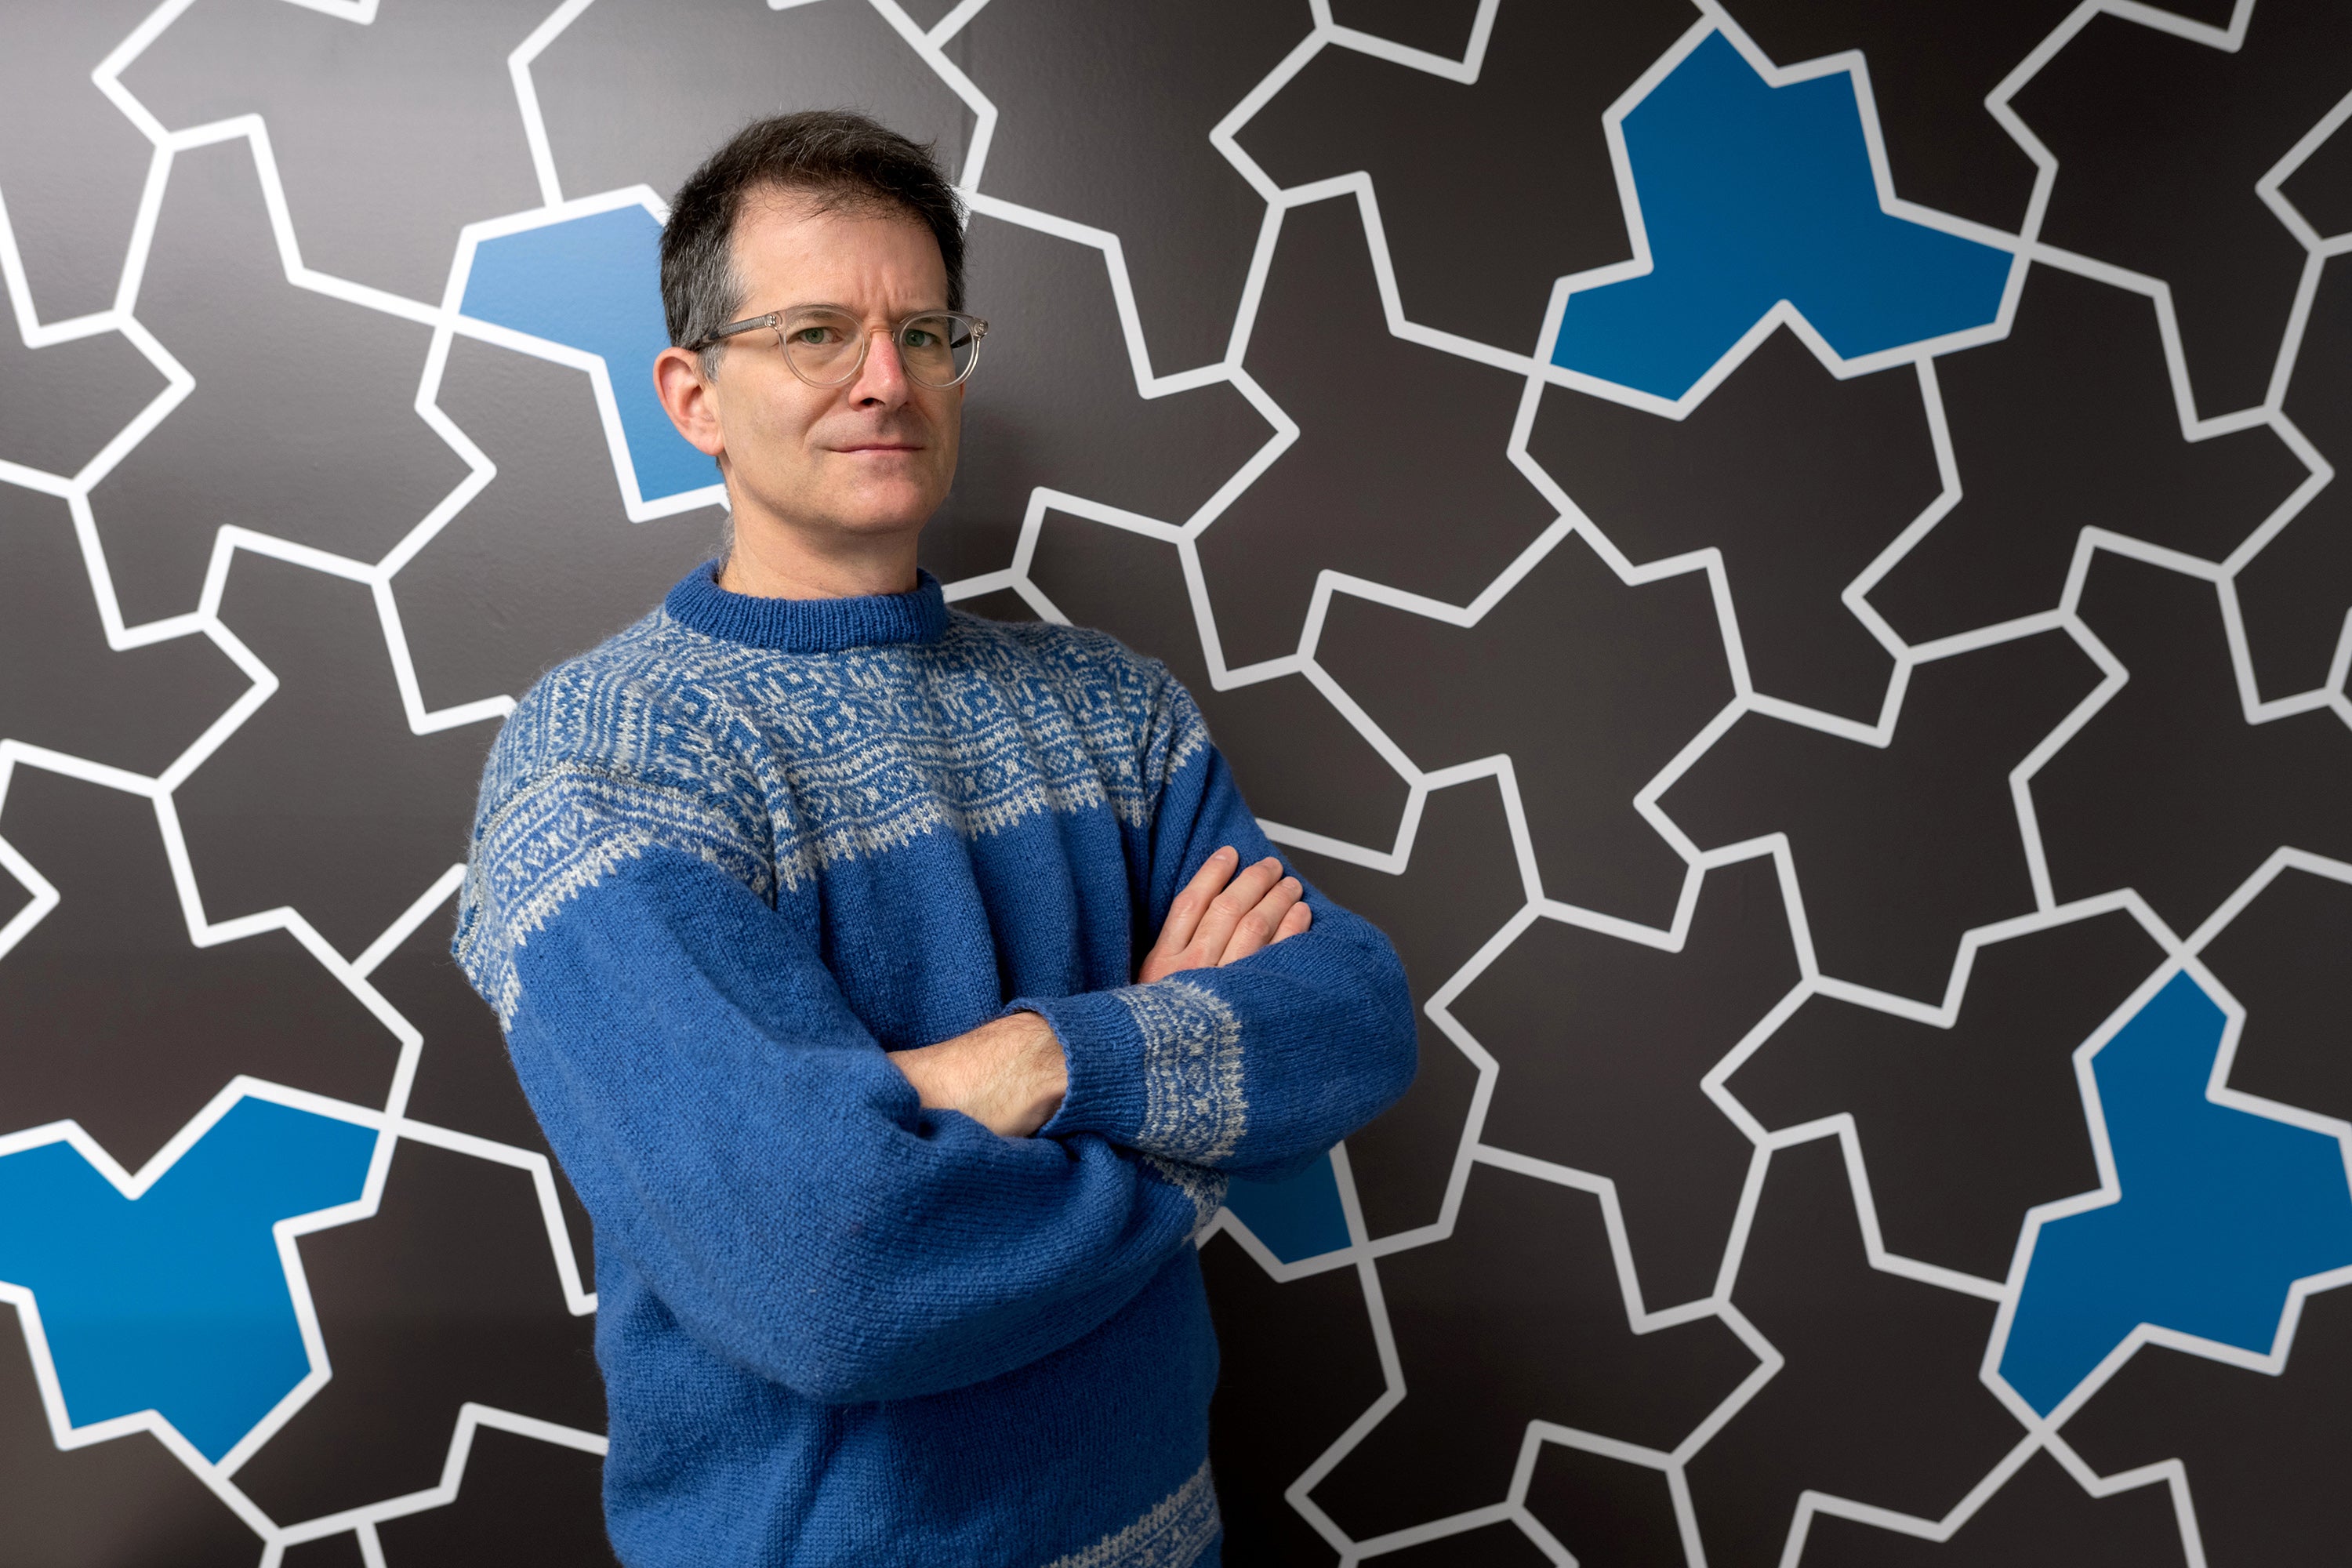 Professor Craig S. Kaplan in front of wall with aperiodic monotiles 